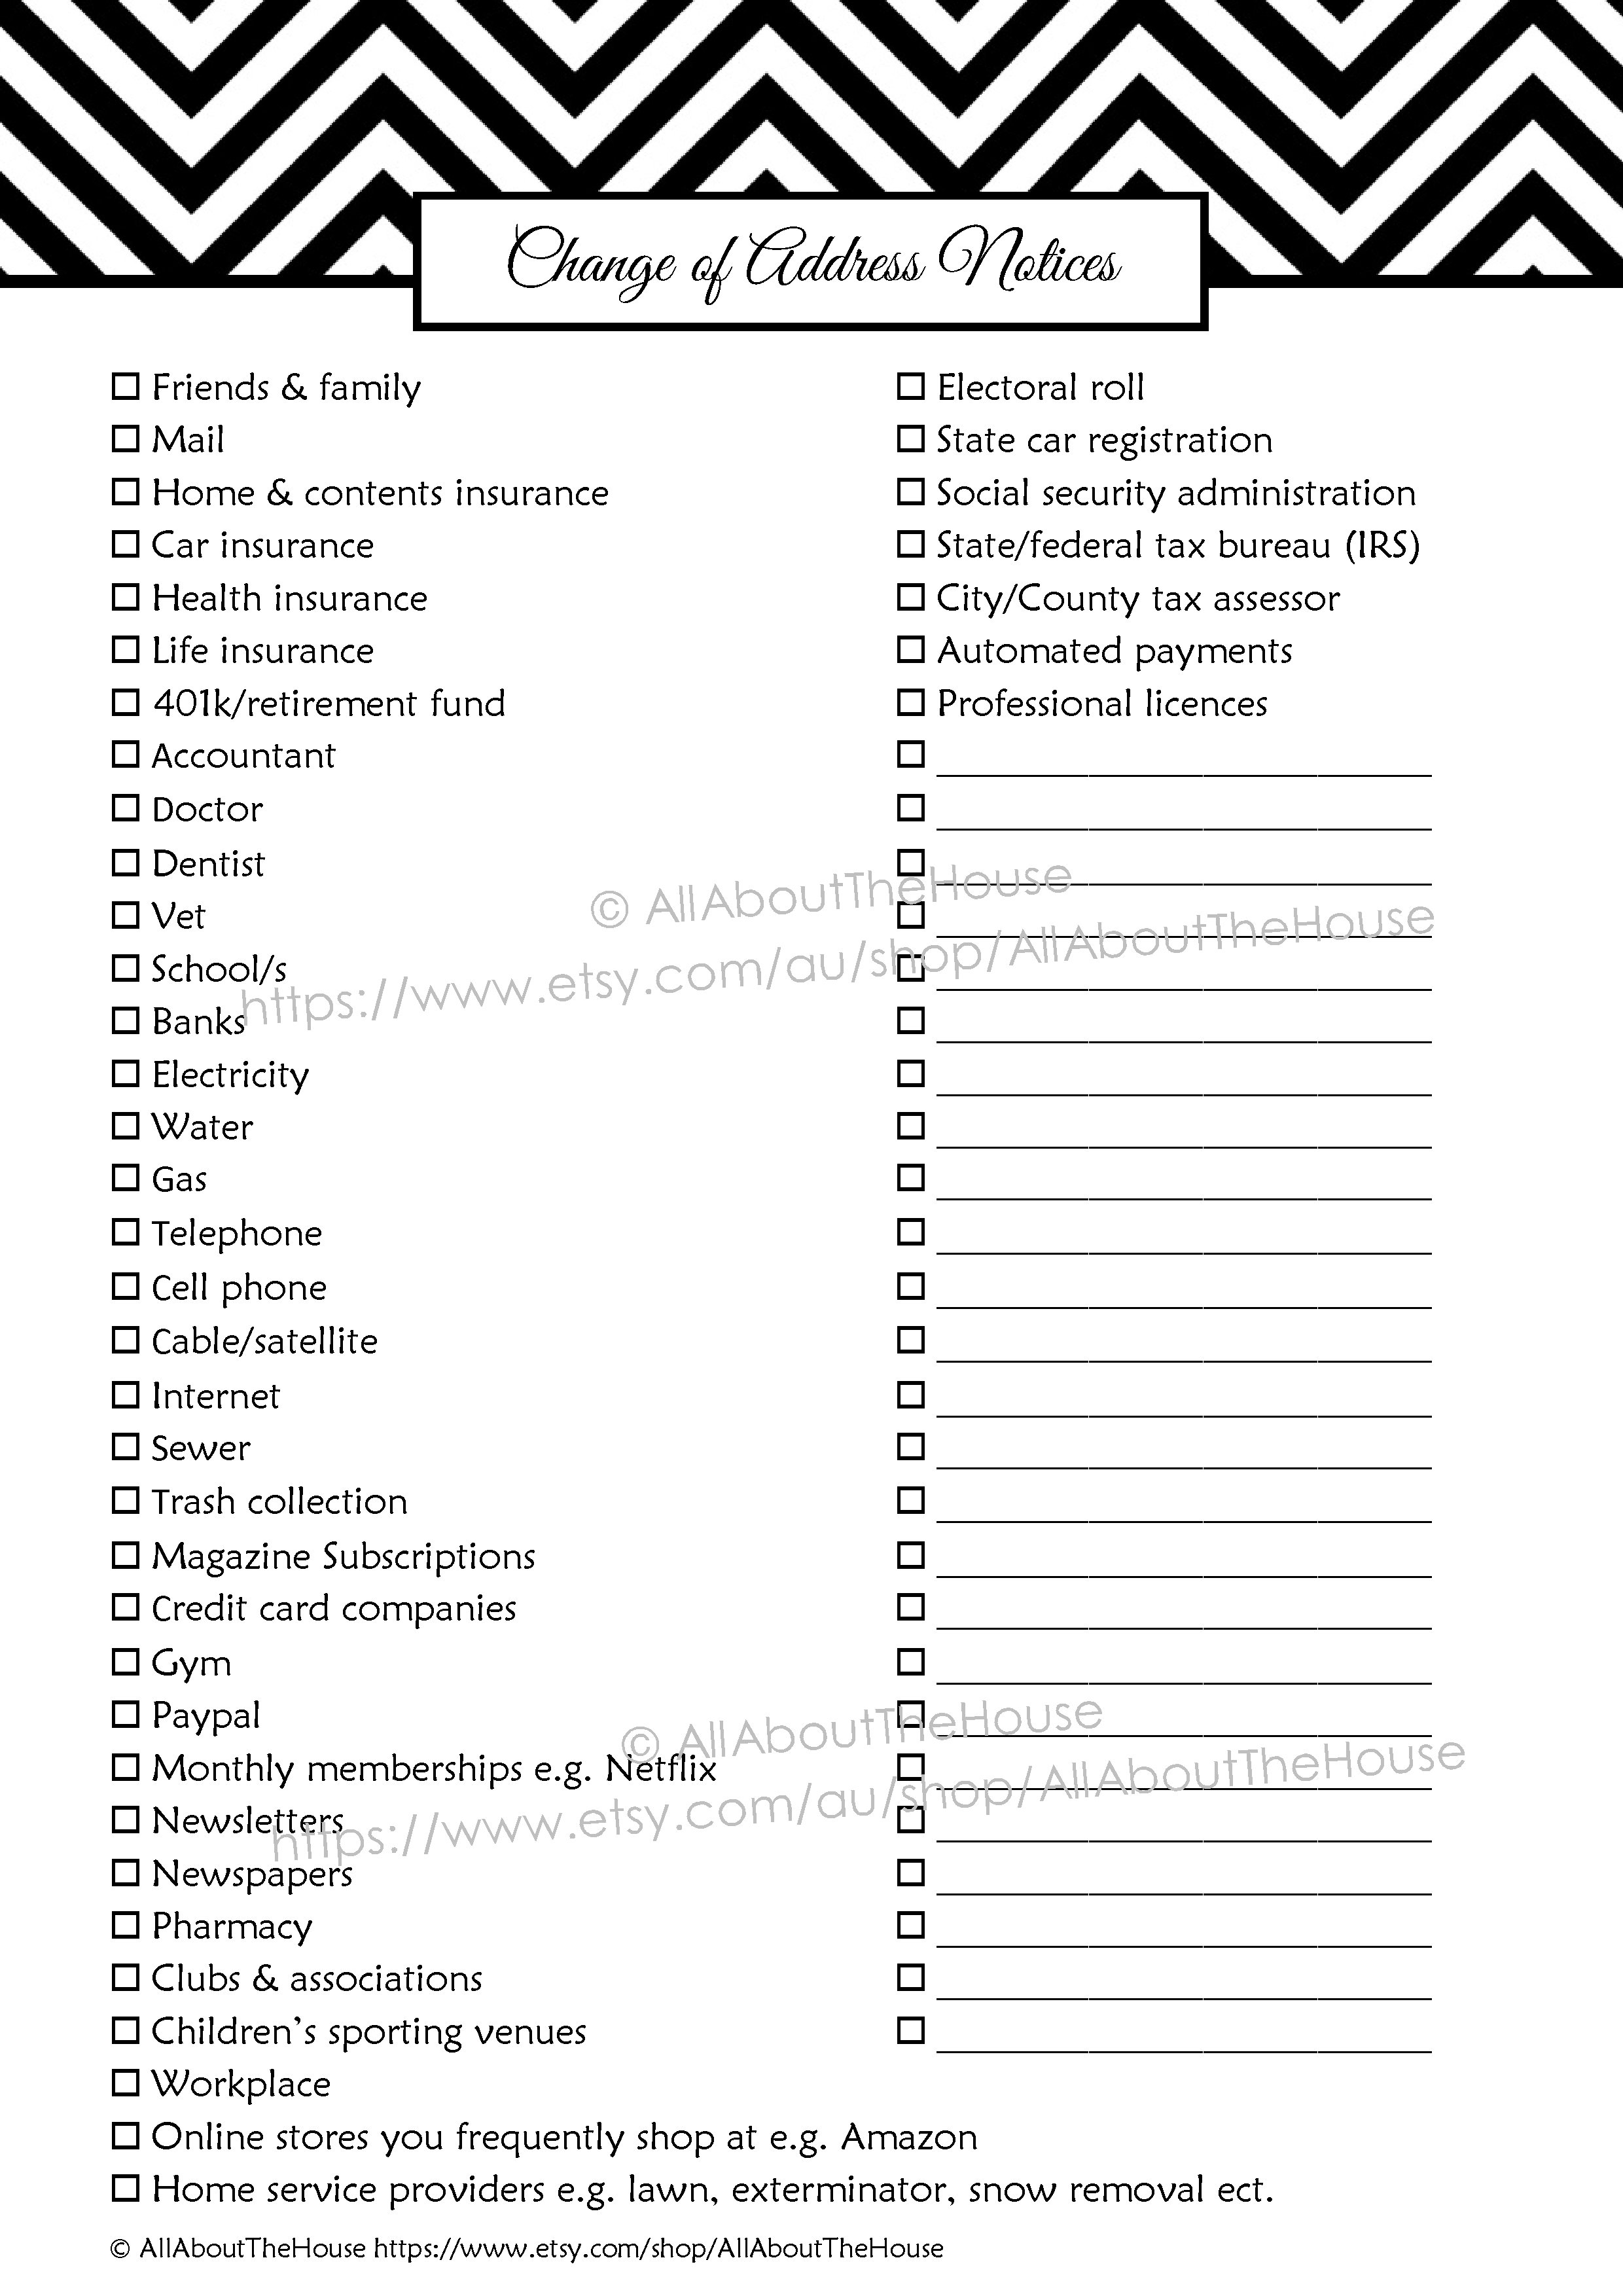 change-of-address-checklist-printable-images-and-photos-finder